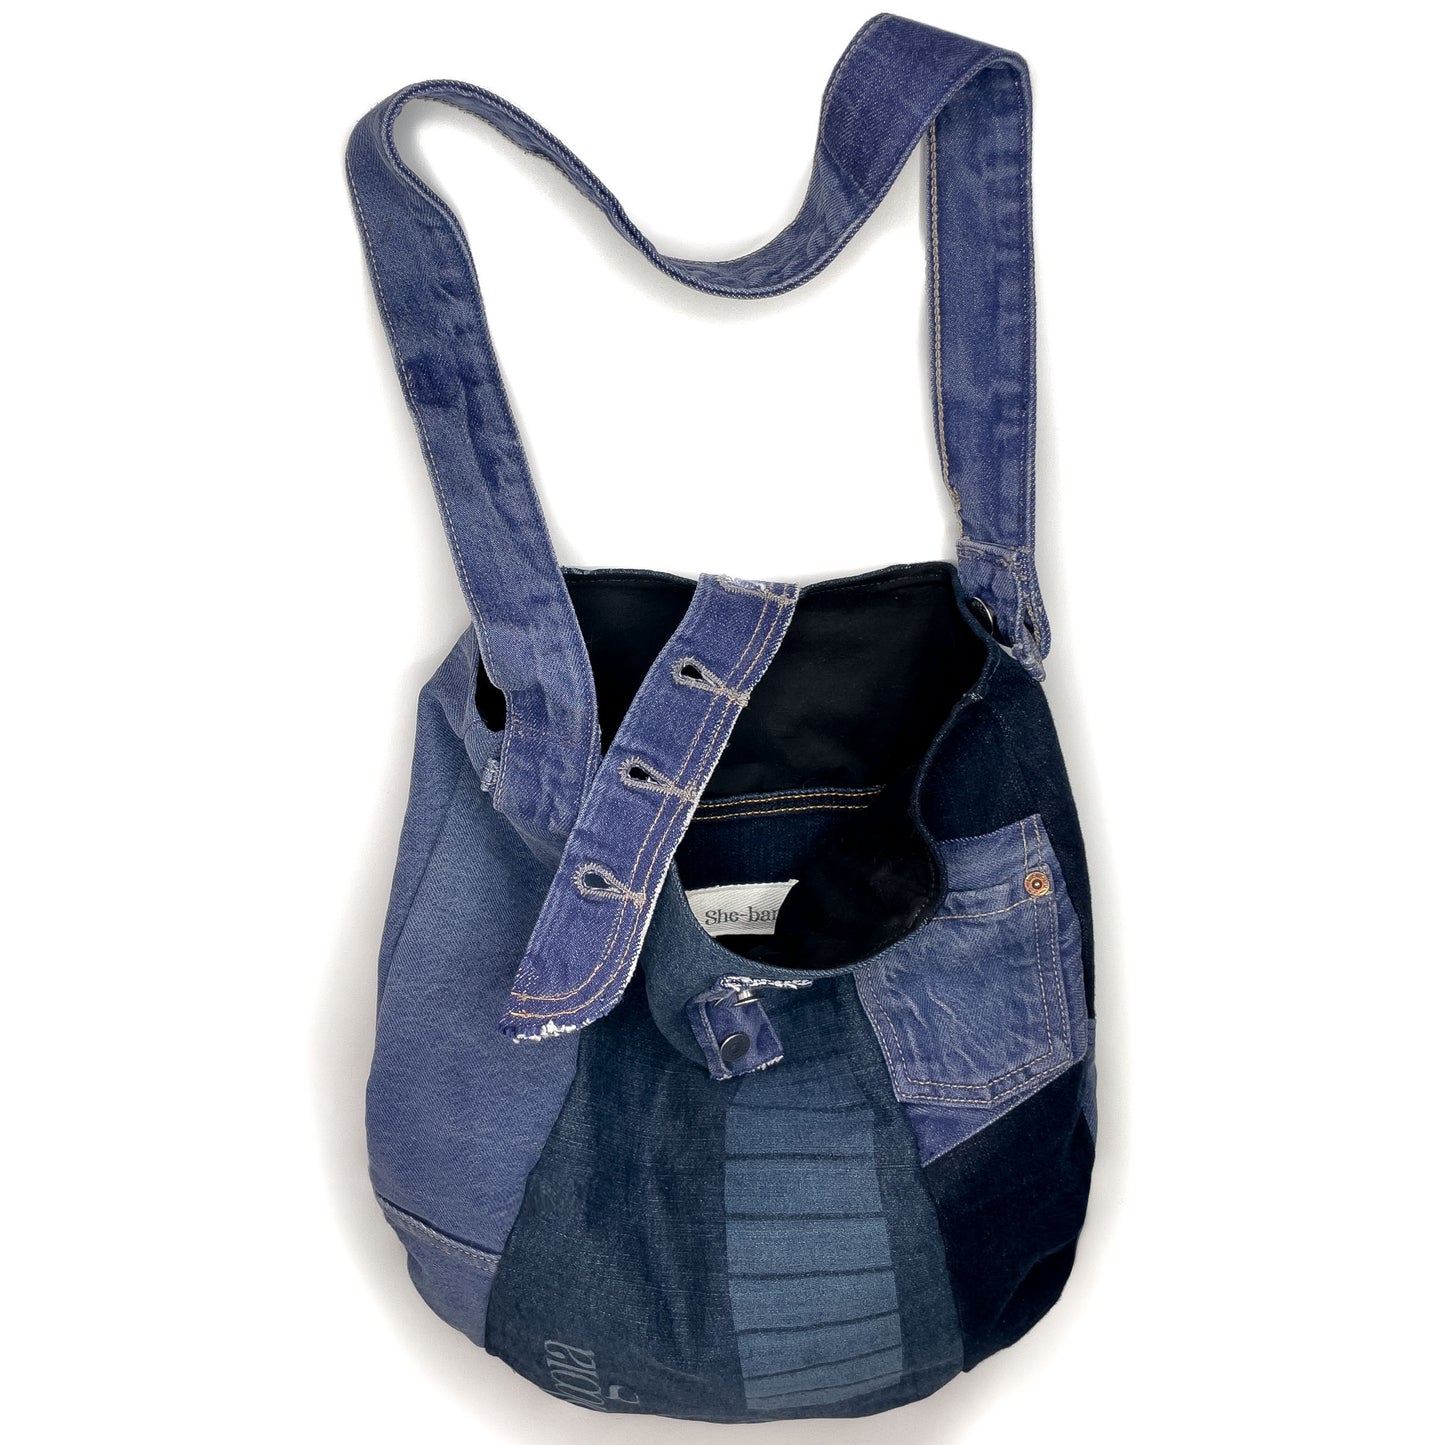 Upcycled Large Denim tote bag, handmade unique handbags, recycled denim bags, handmade completely one of a kind bags made by local brooklyn designers.